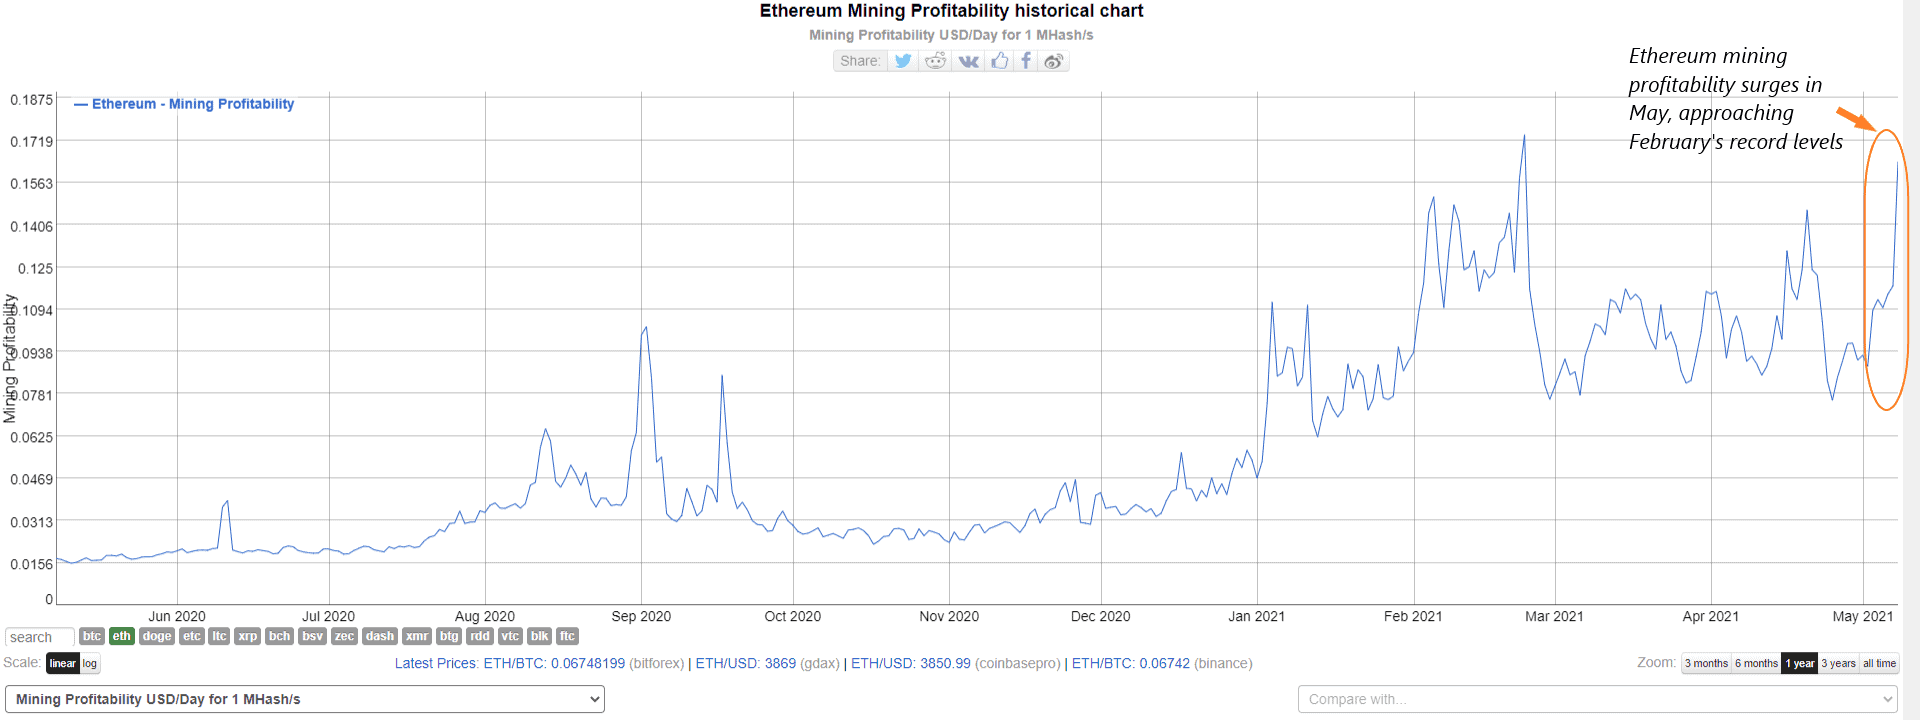 Ethereum mining profitability per 1MHash/s, May 10, 2020 to May 10, 2021